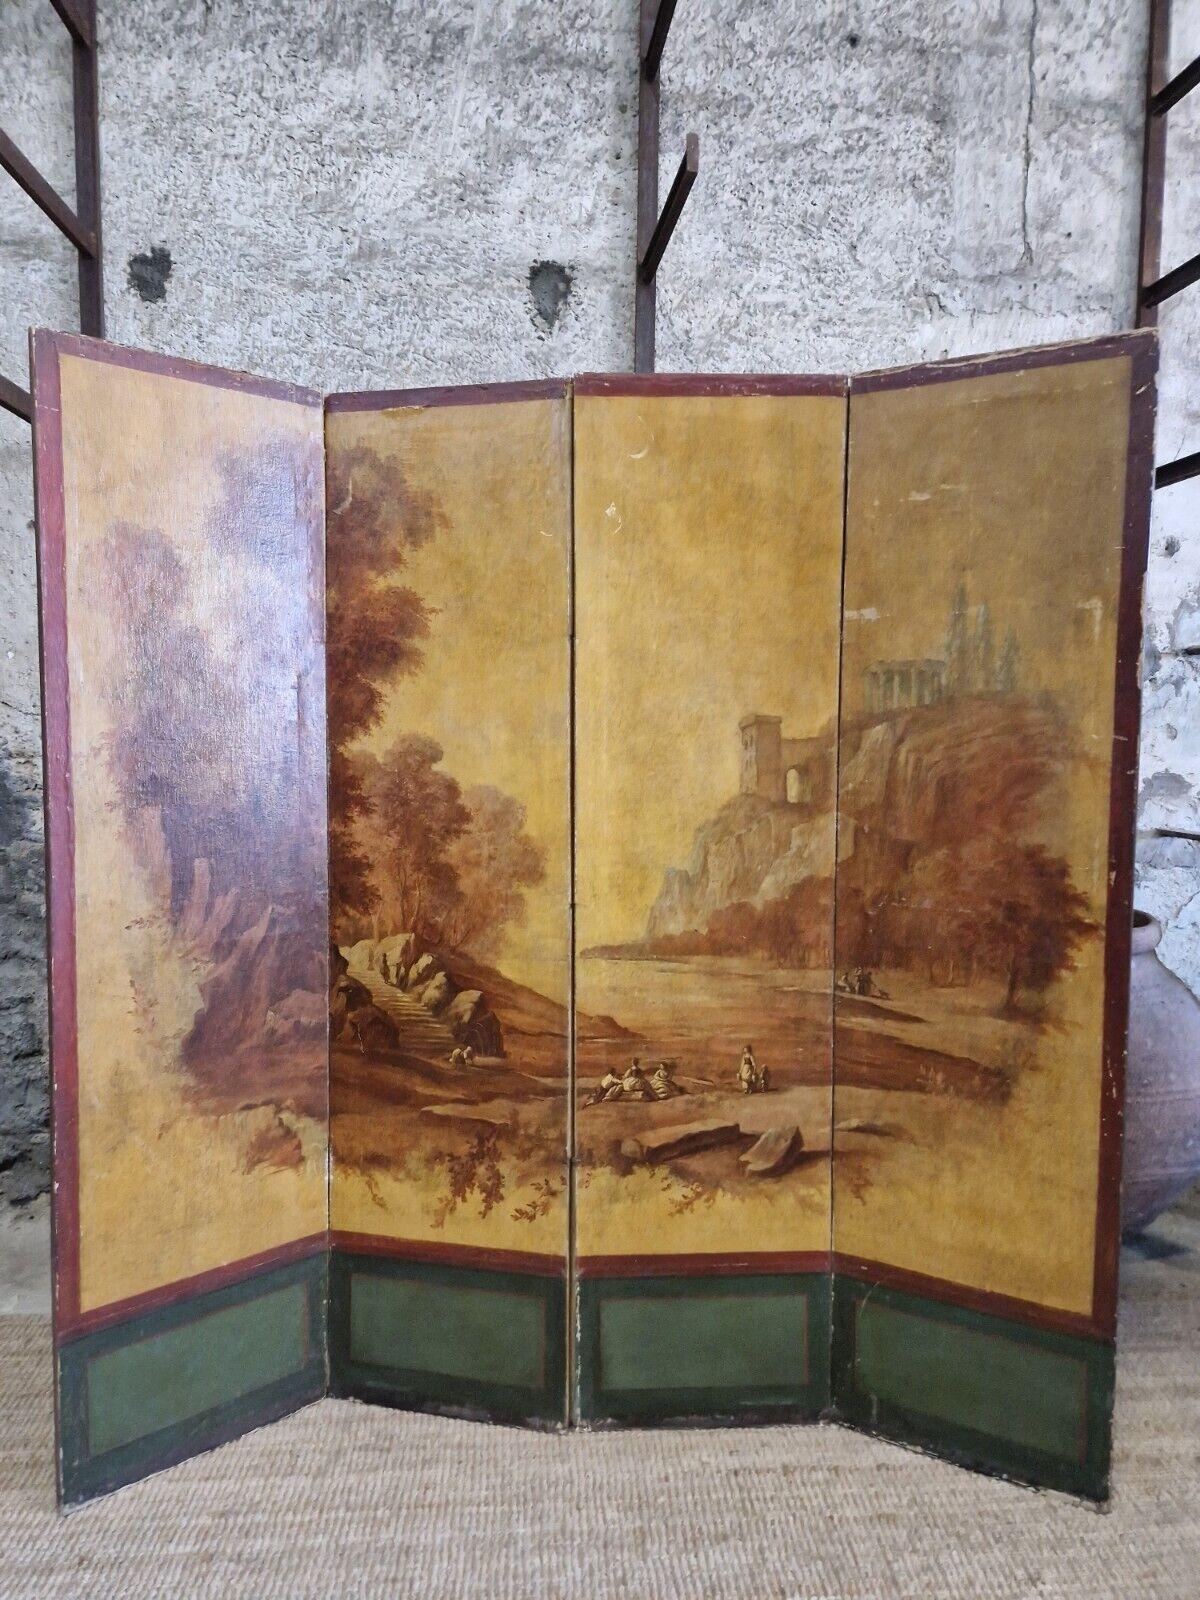 

This stunning 4Panel Room Divider screen from 19th century France is sure to make a statement in any room. Handmade with attention to detail, this free-standing screen features a beautiful landscape theme that has been hand-painted onto the wooden